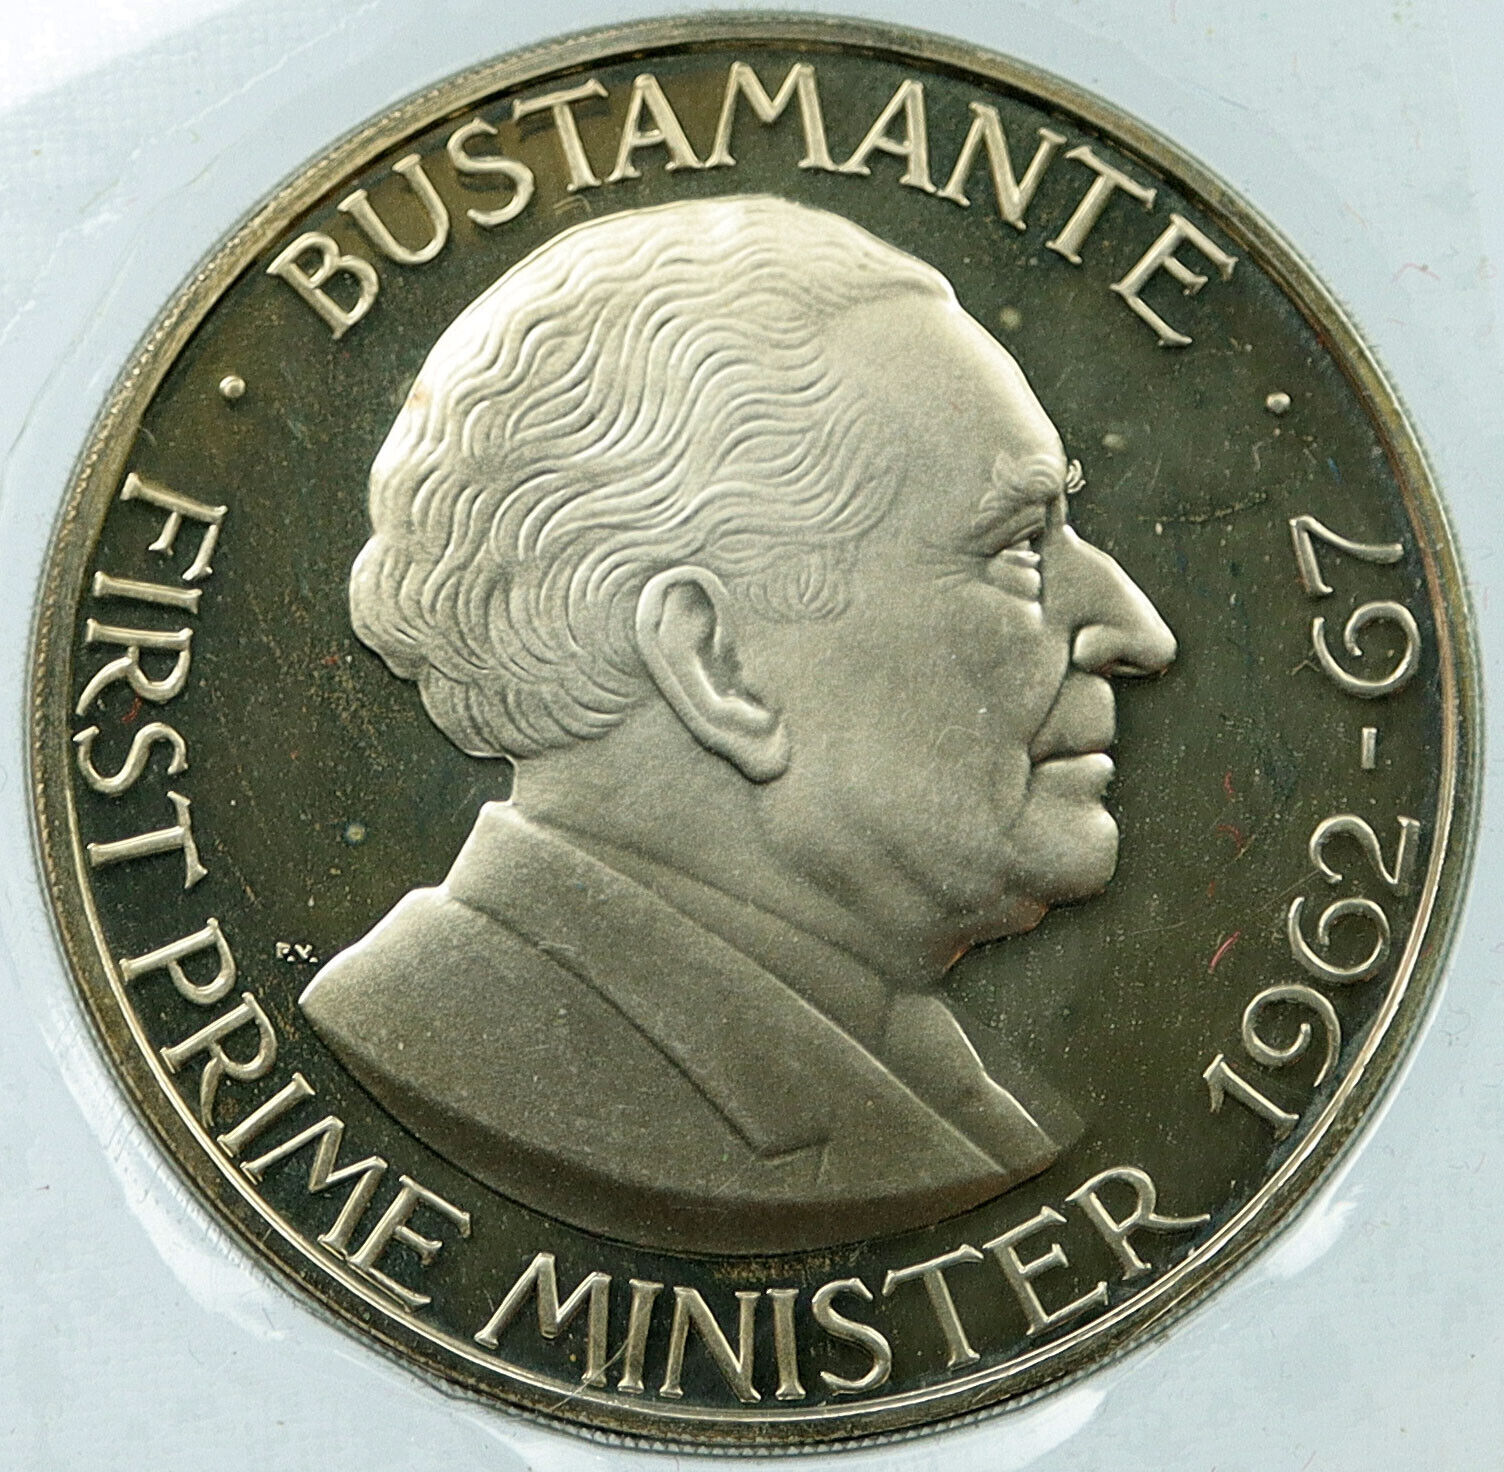 1974 JAMAICA First Prime Minister BUSTAMANTE Vintage Proof Dollar Coin i117790